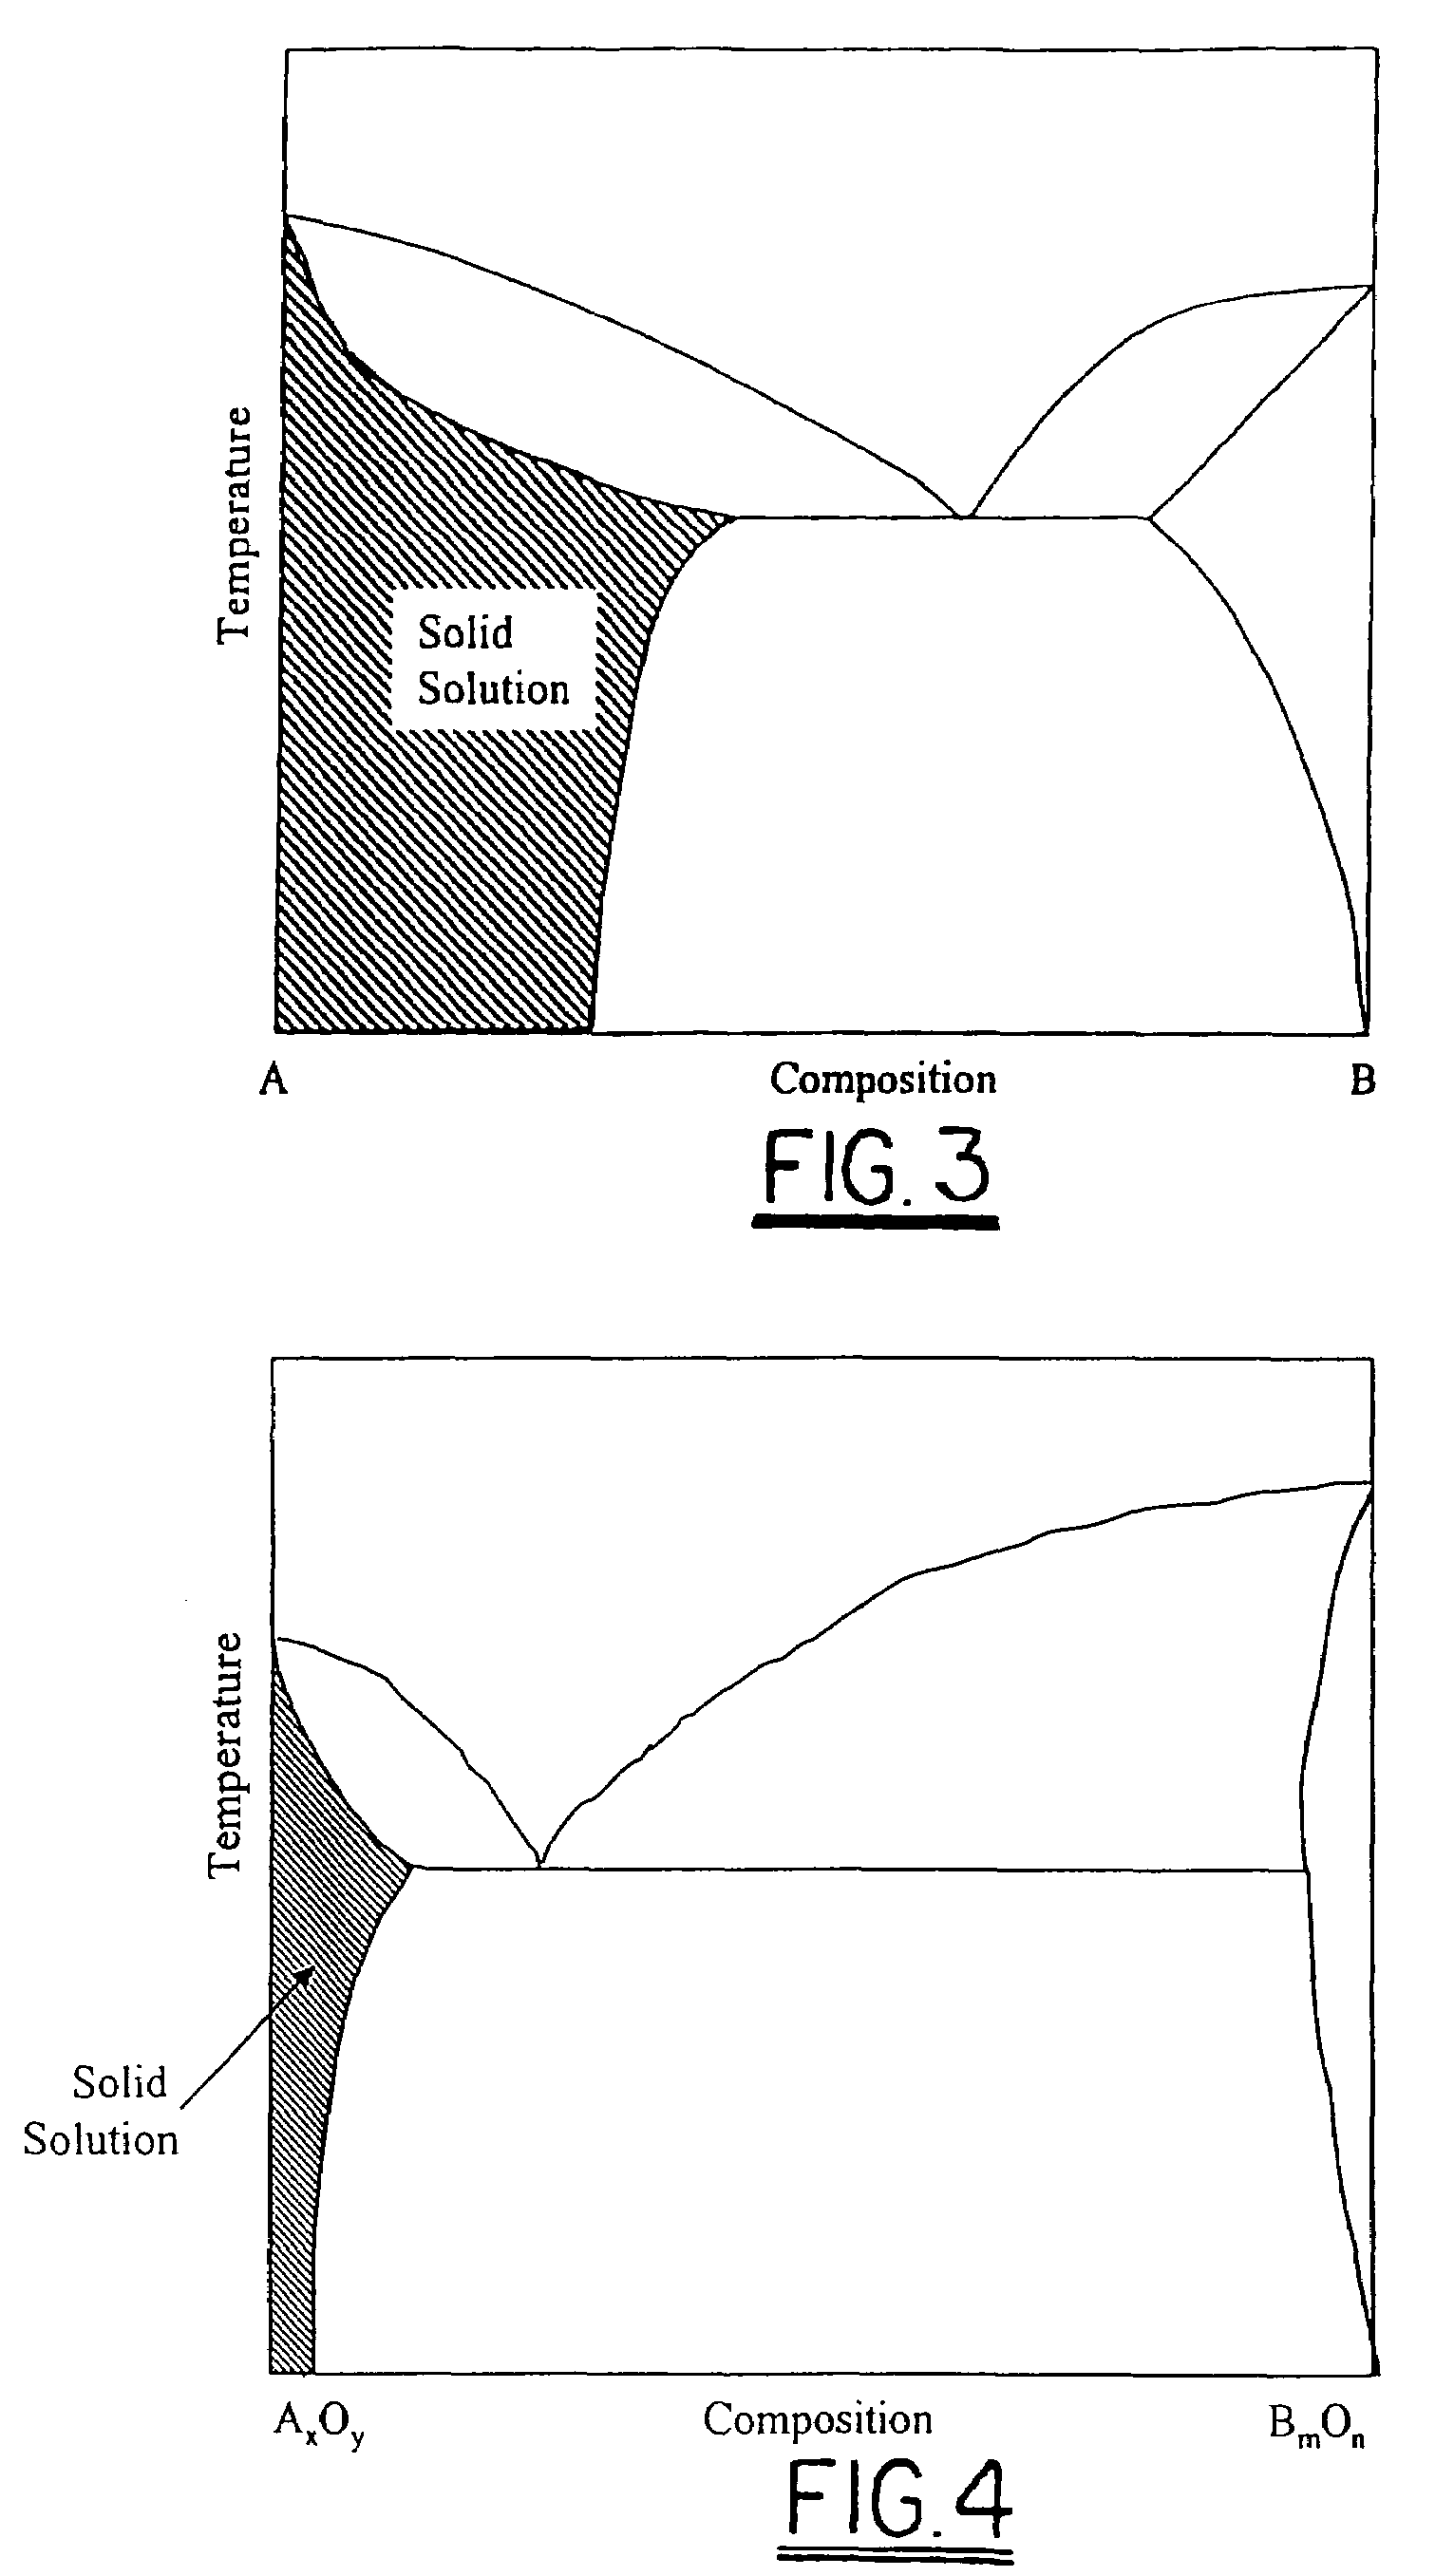 Fuel cell with metal alloy contacts that form passivating conductive oxide surfaces